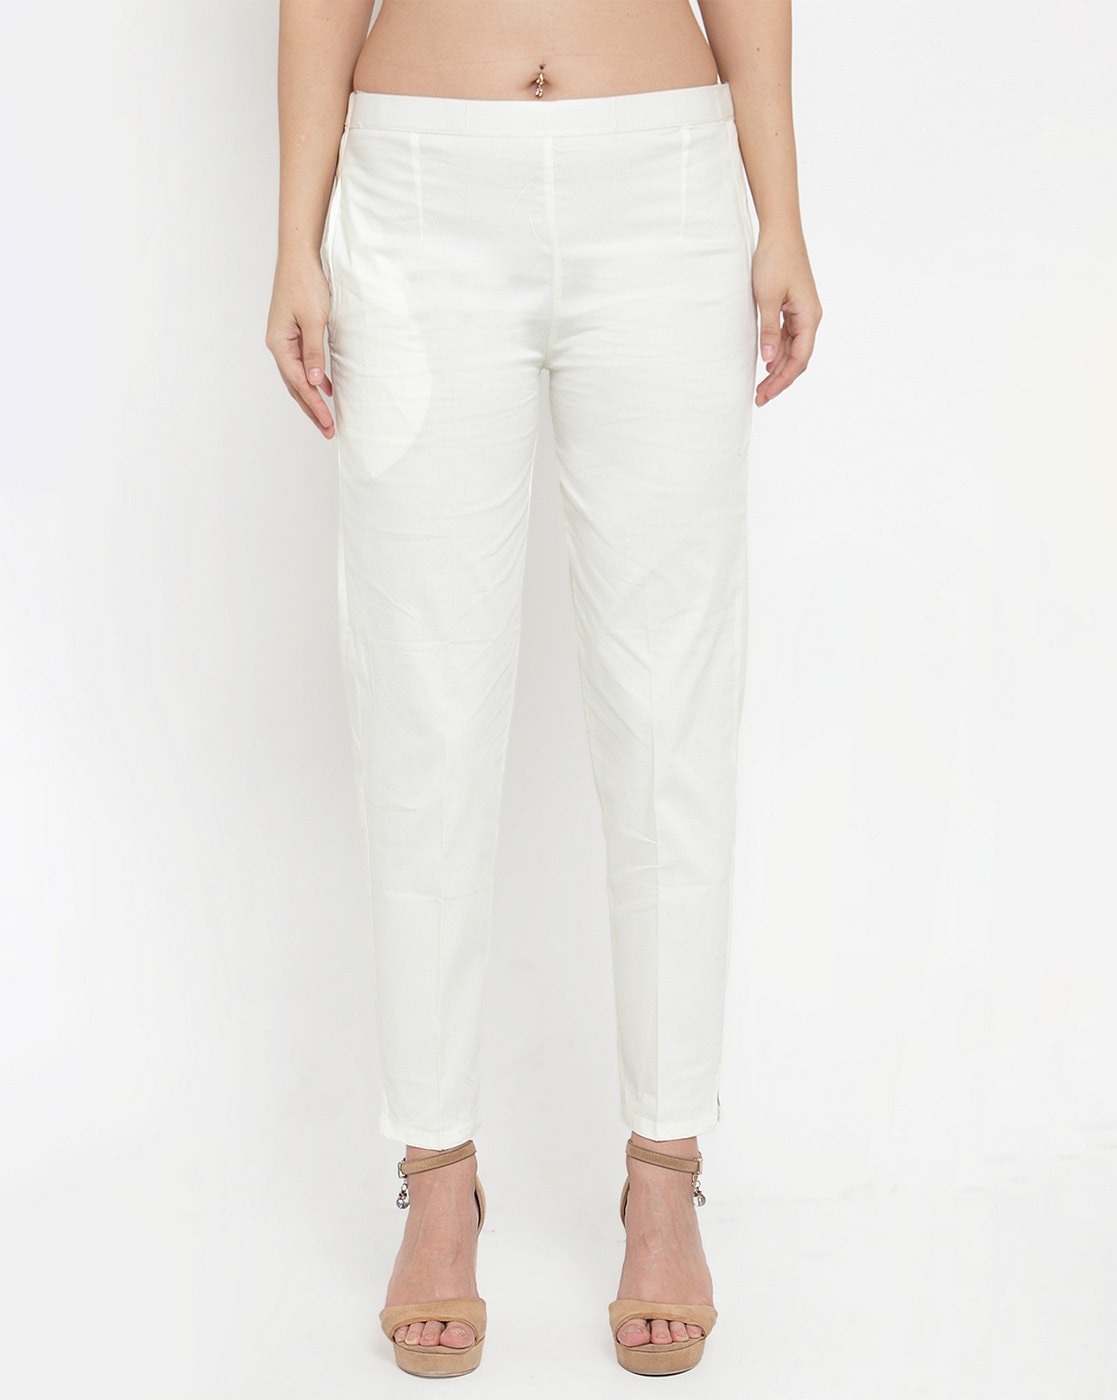 Buy Dollar Missy Women's Relaxed Pants (MMCC-525-R3-32-WHITE-PO1_White_M)  at Amazon.in